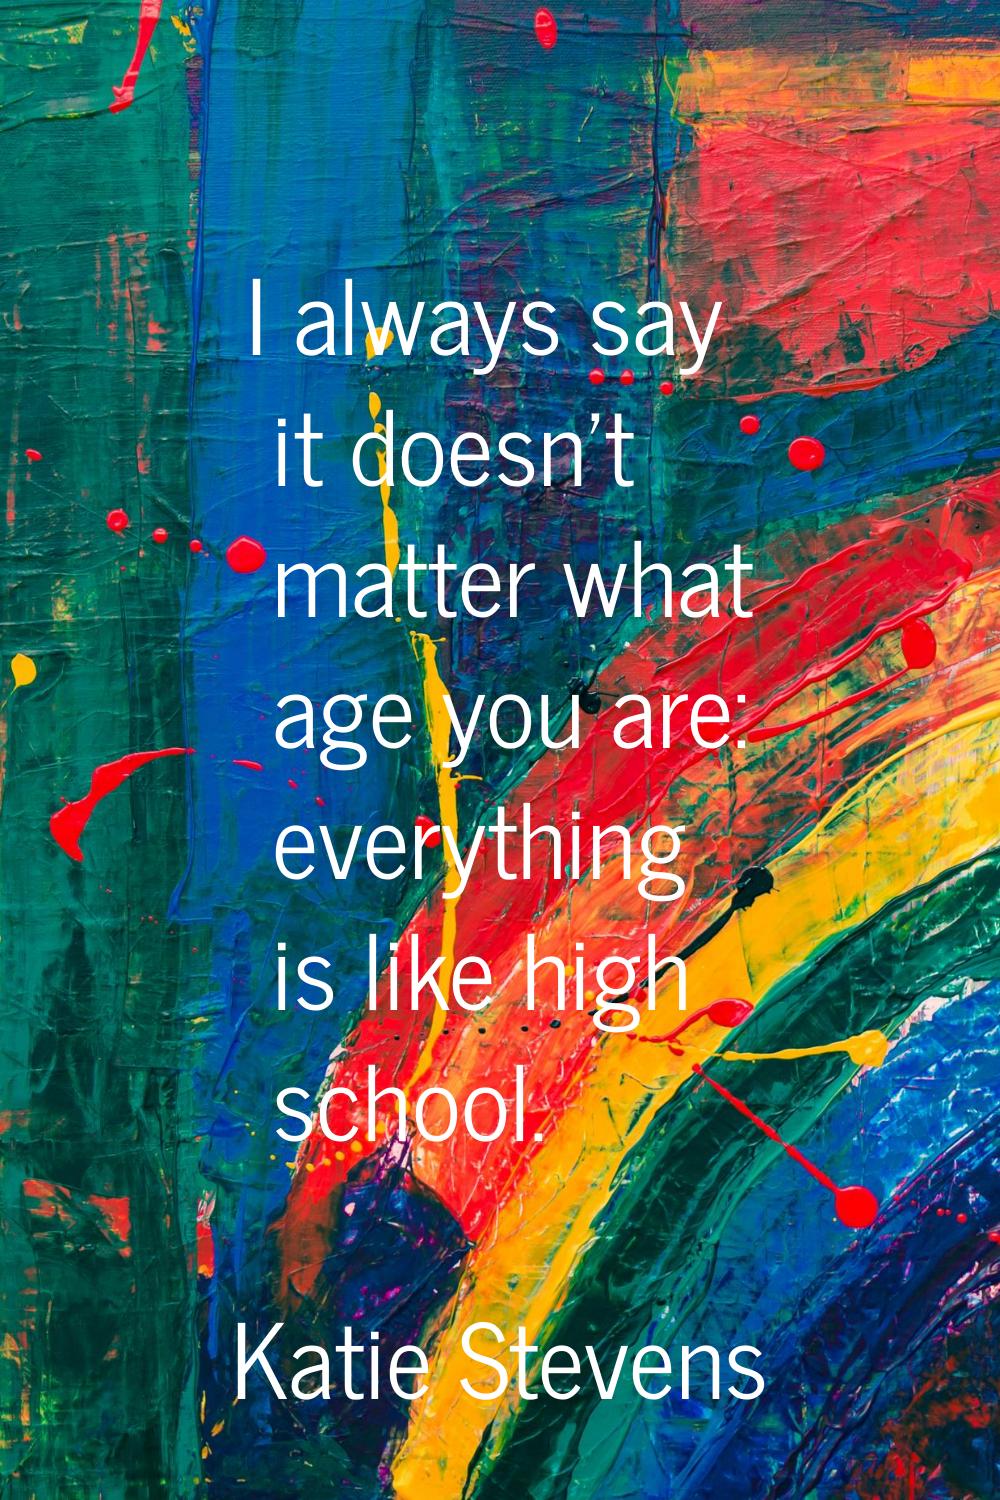 I always say it doesn't matter what age you are: everything is like high school.